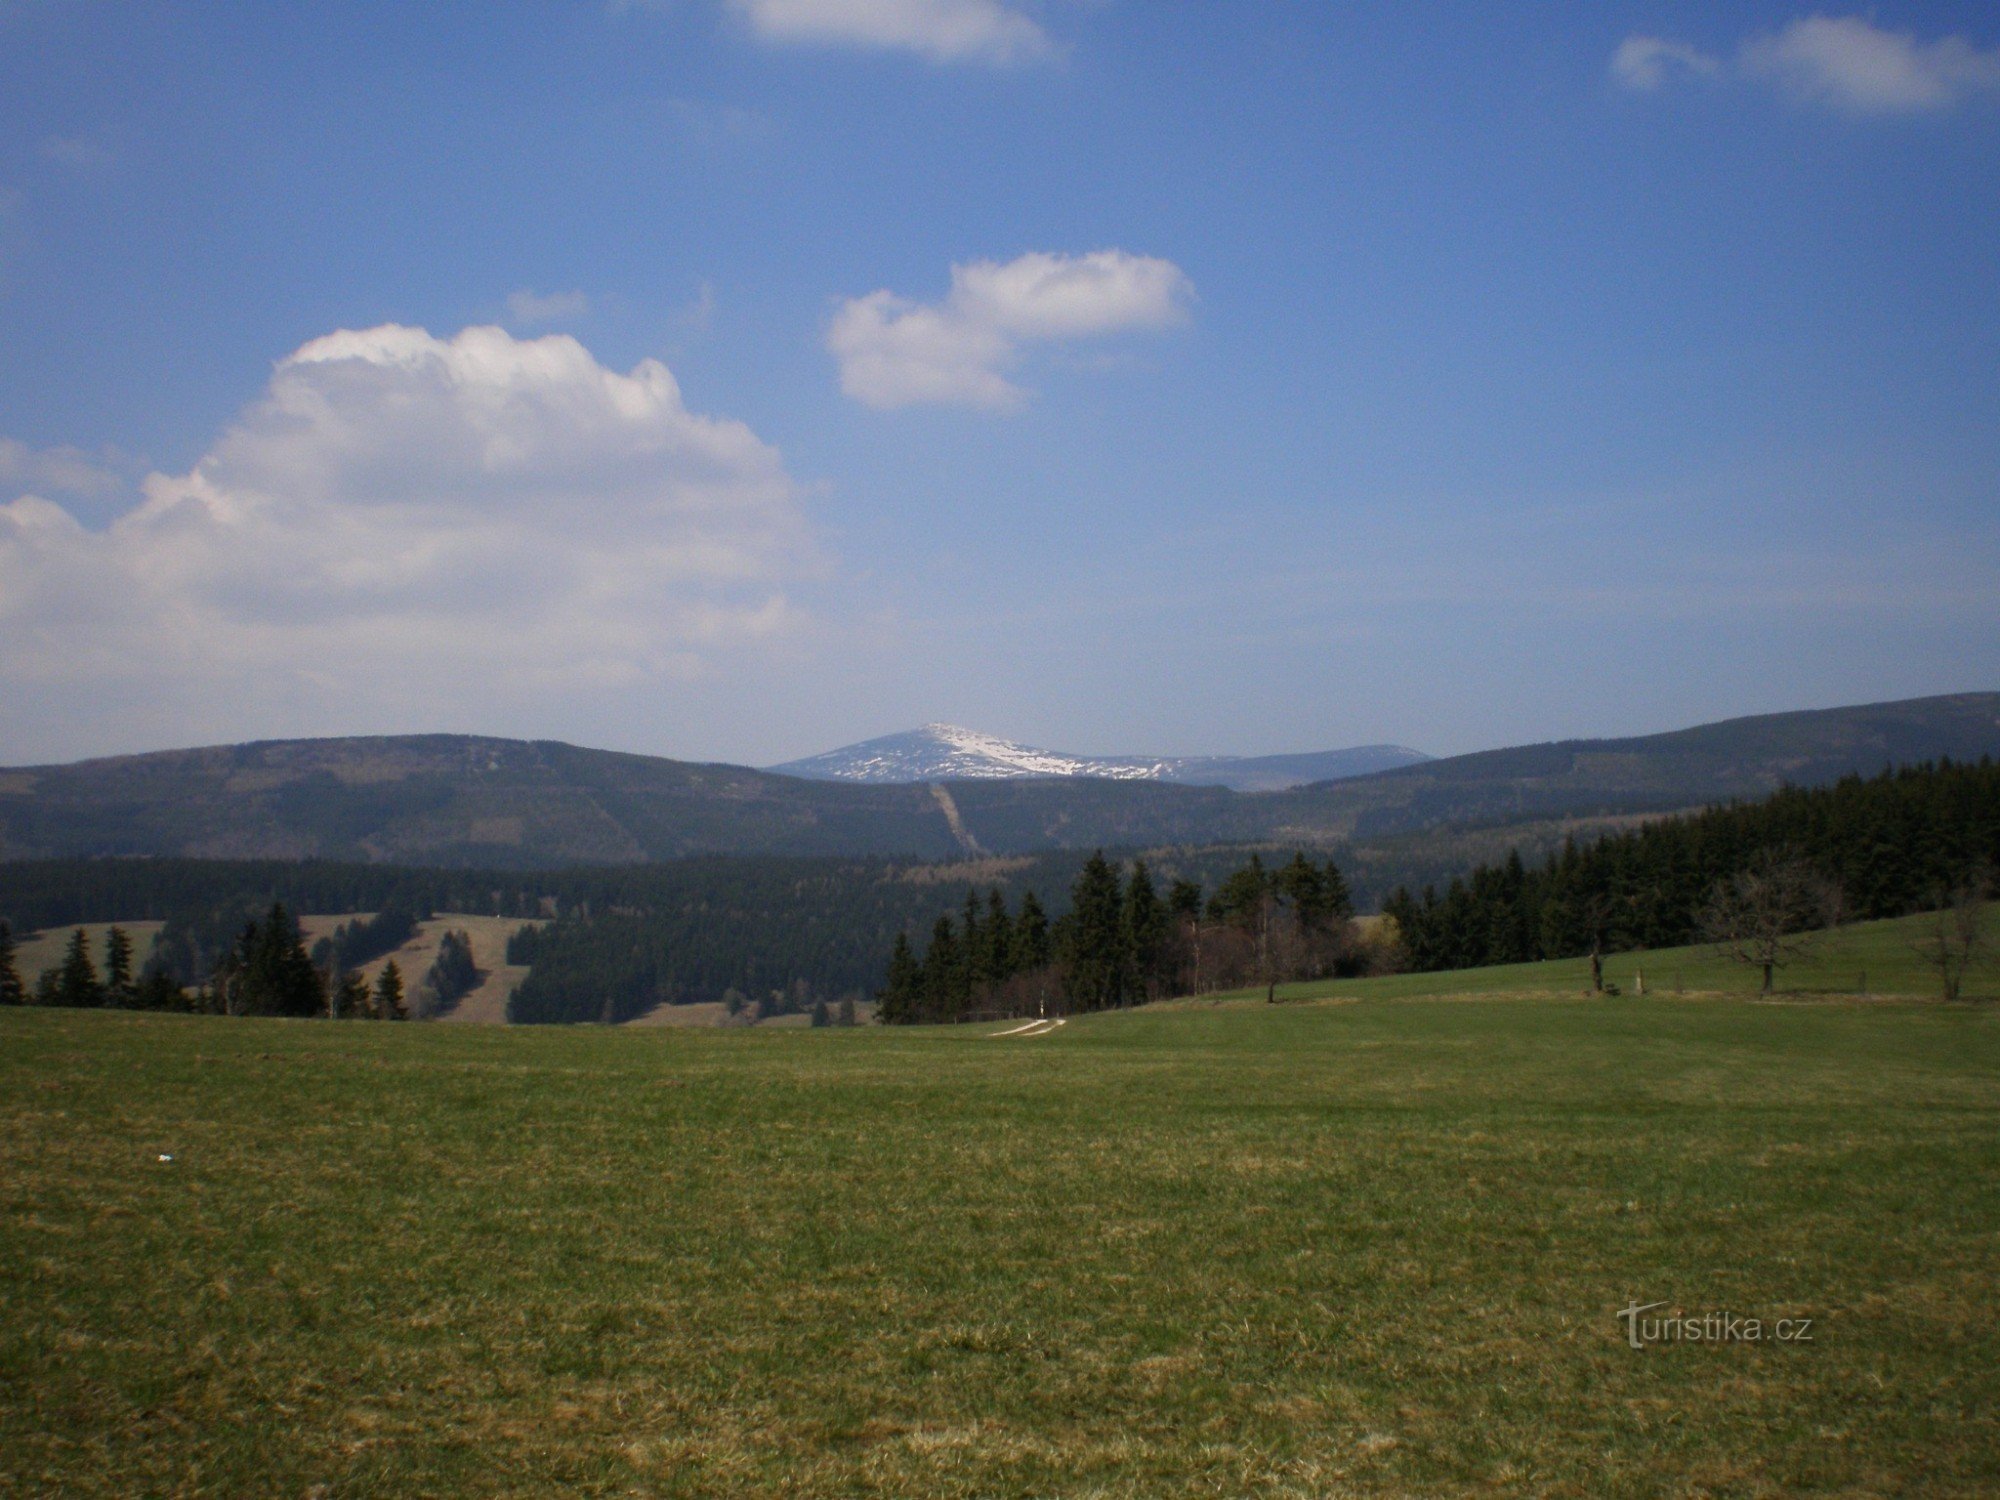 View from Upper Albeřice to the NW (Sněžek in the background)